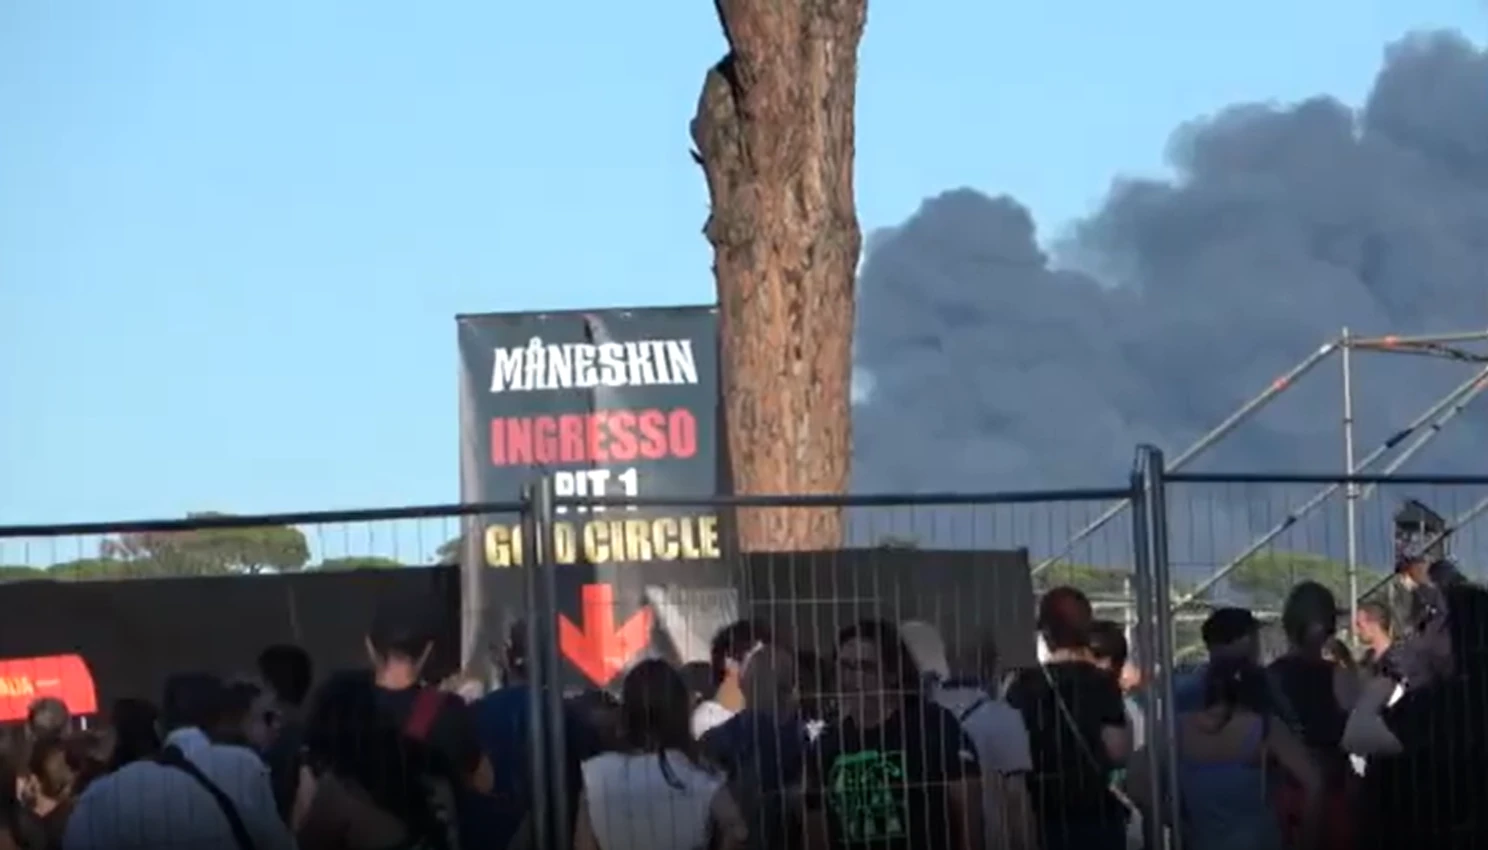 Large fire in Rome, the column of smoke clearly visible behind the Maneskin stage at the Circus Maximus